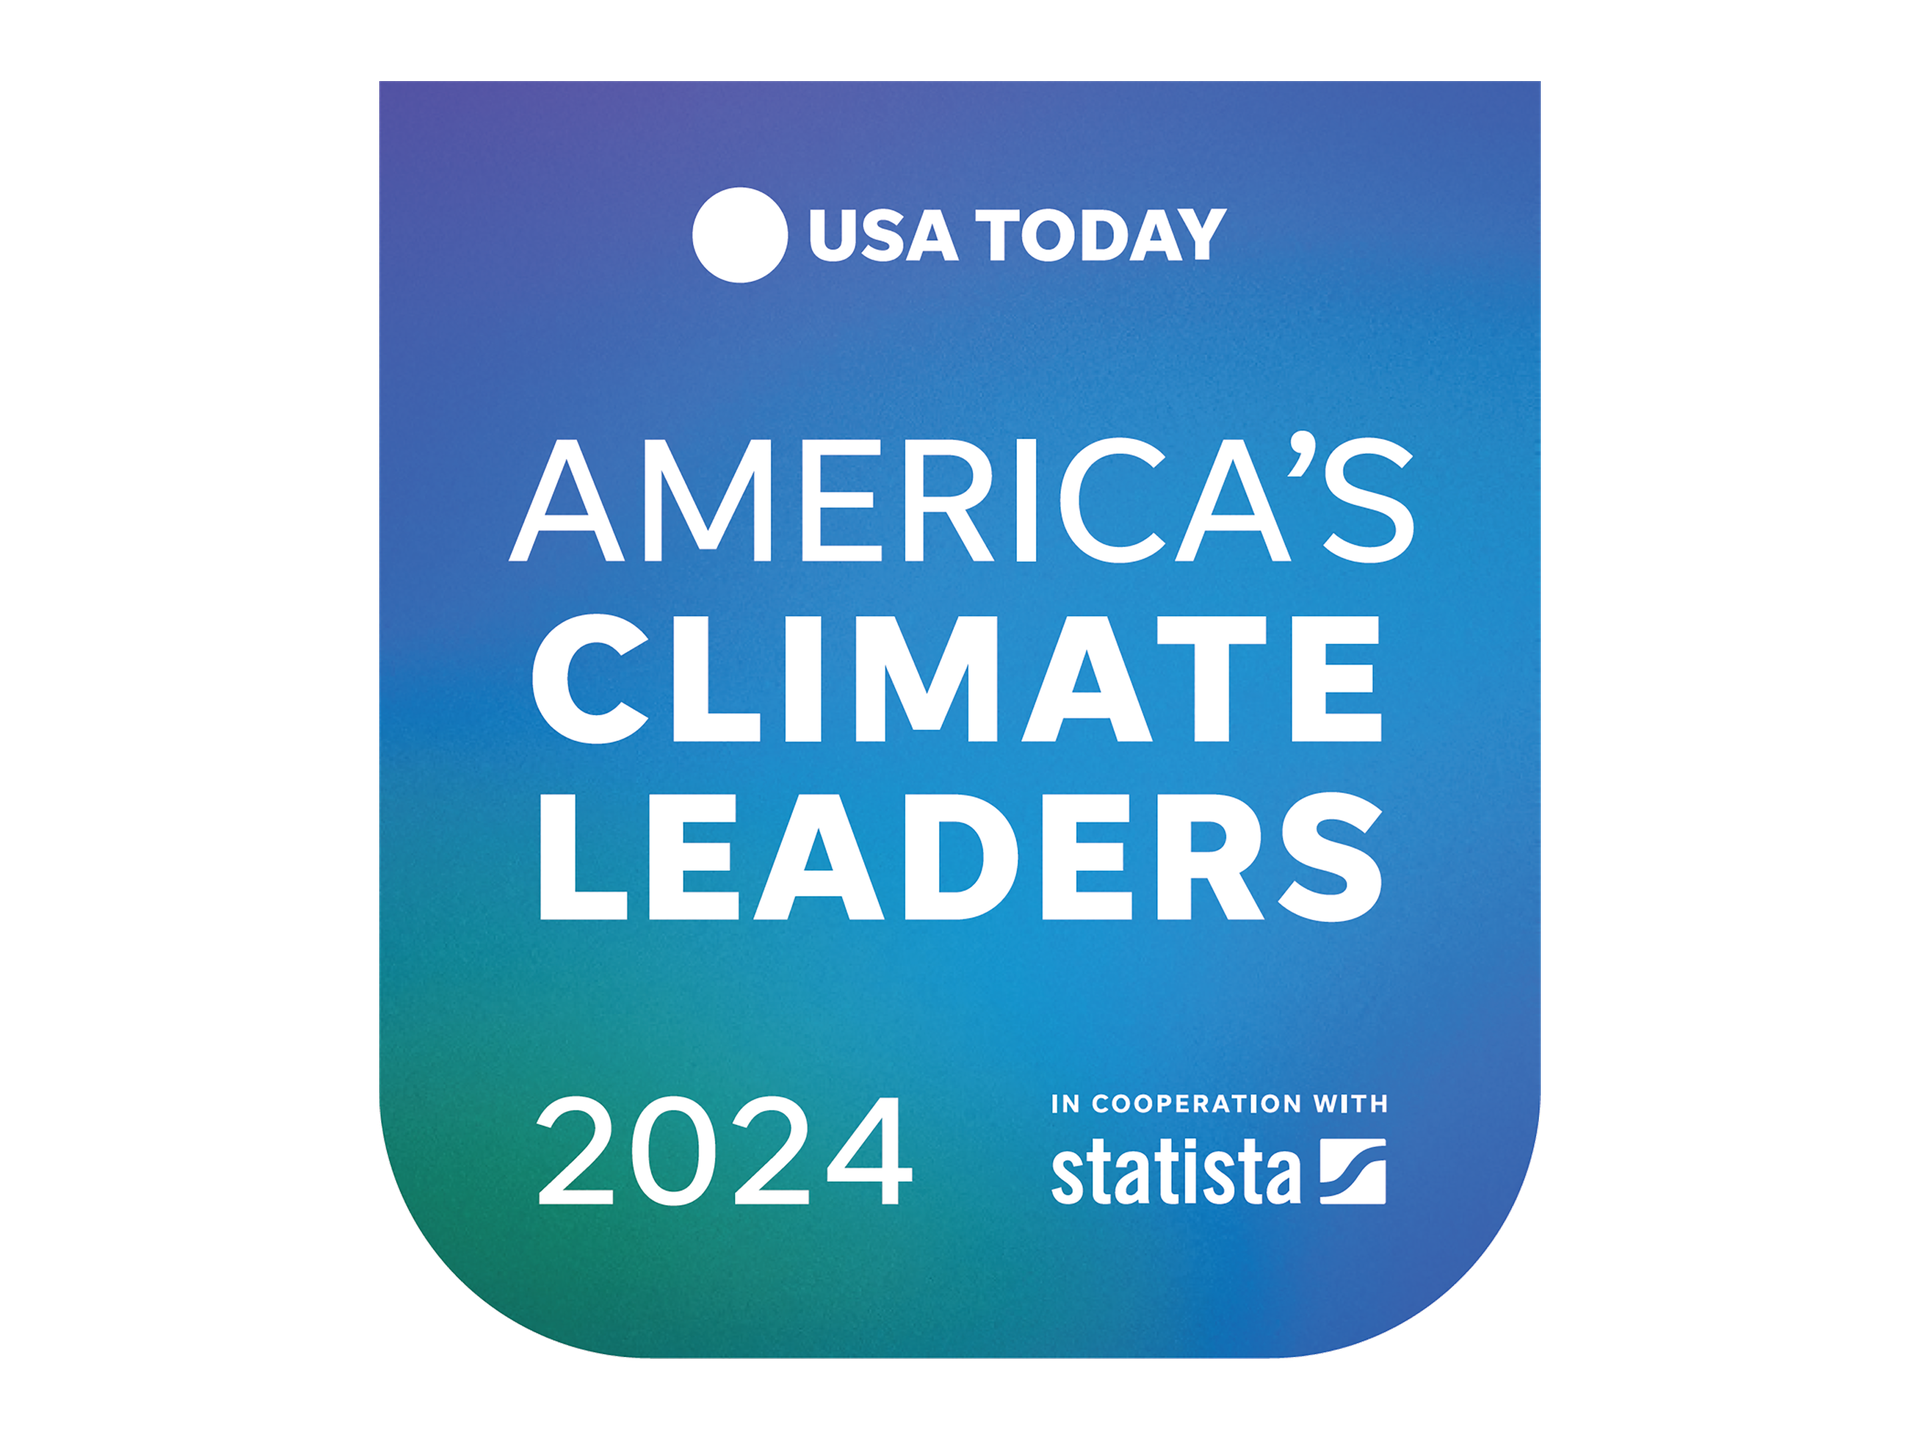 Diamond Recognized Recognized on USA TODAY’s America's Climate Leaders 2024 List